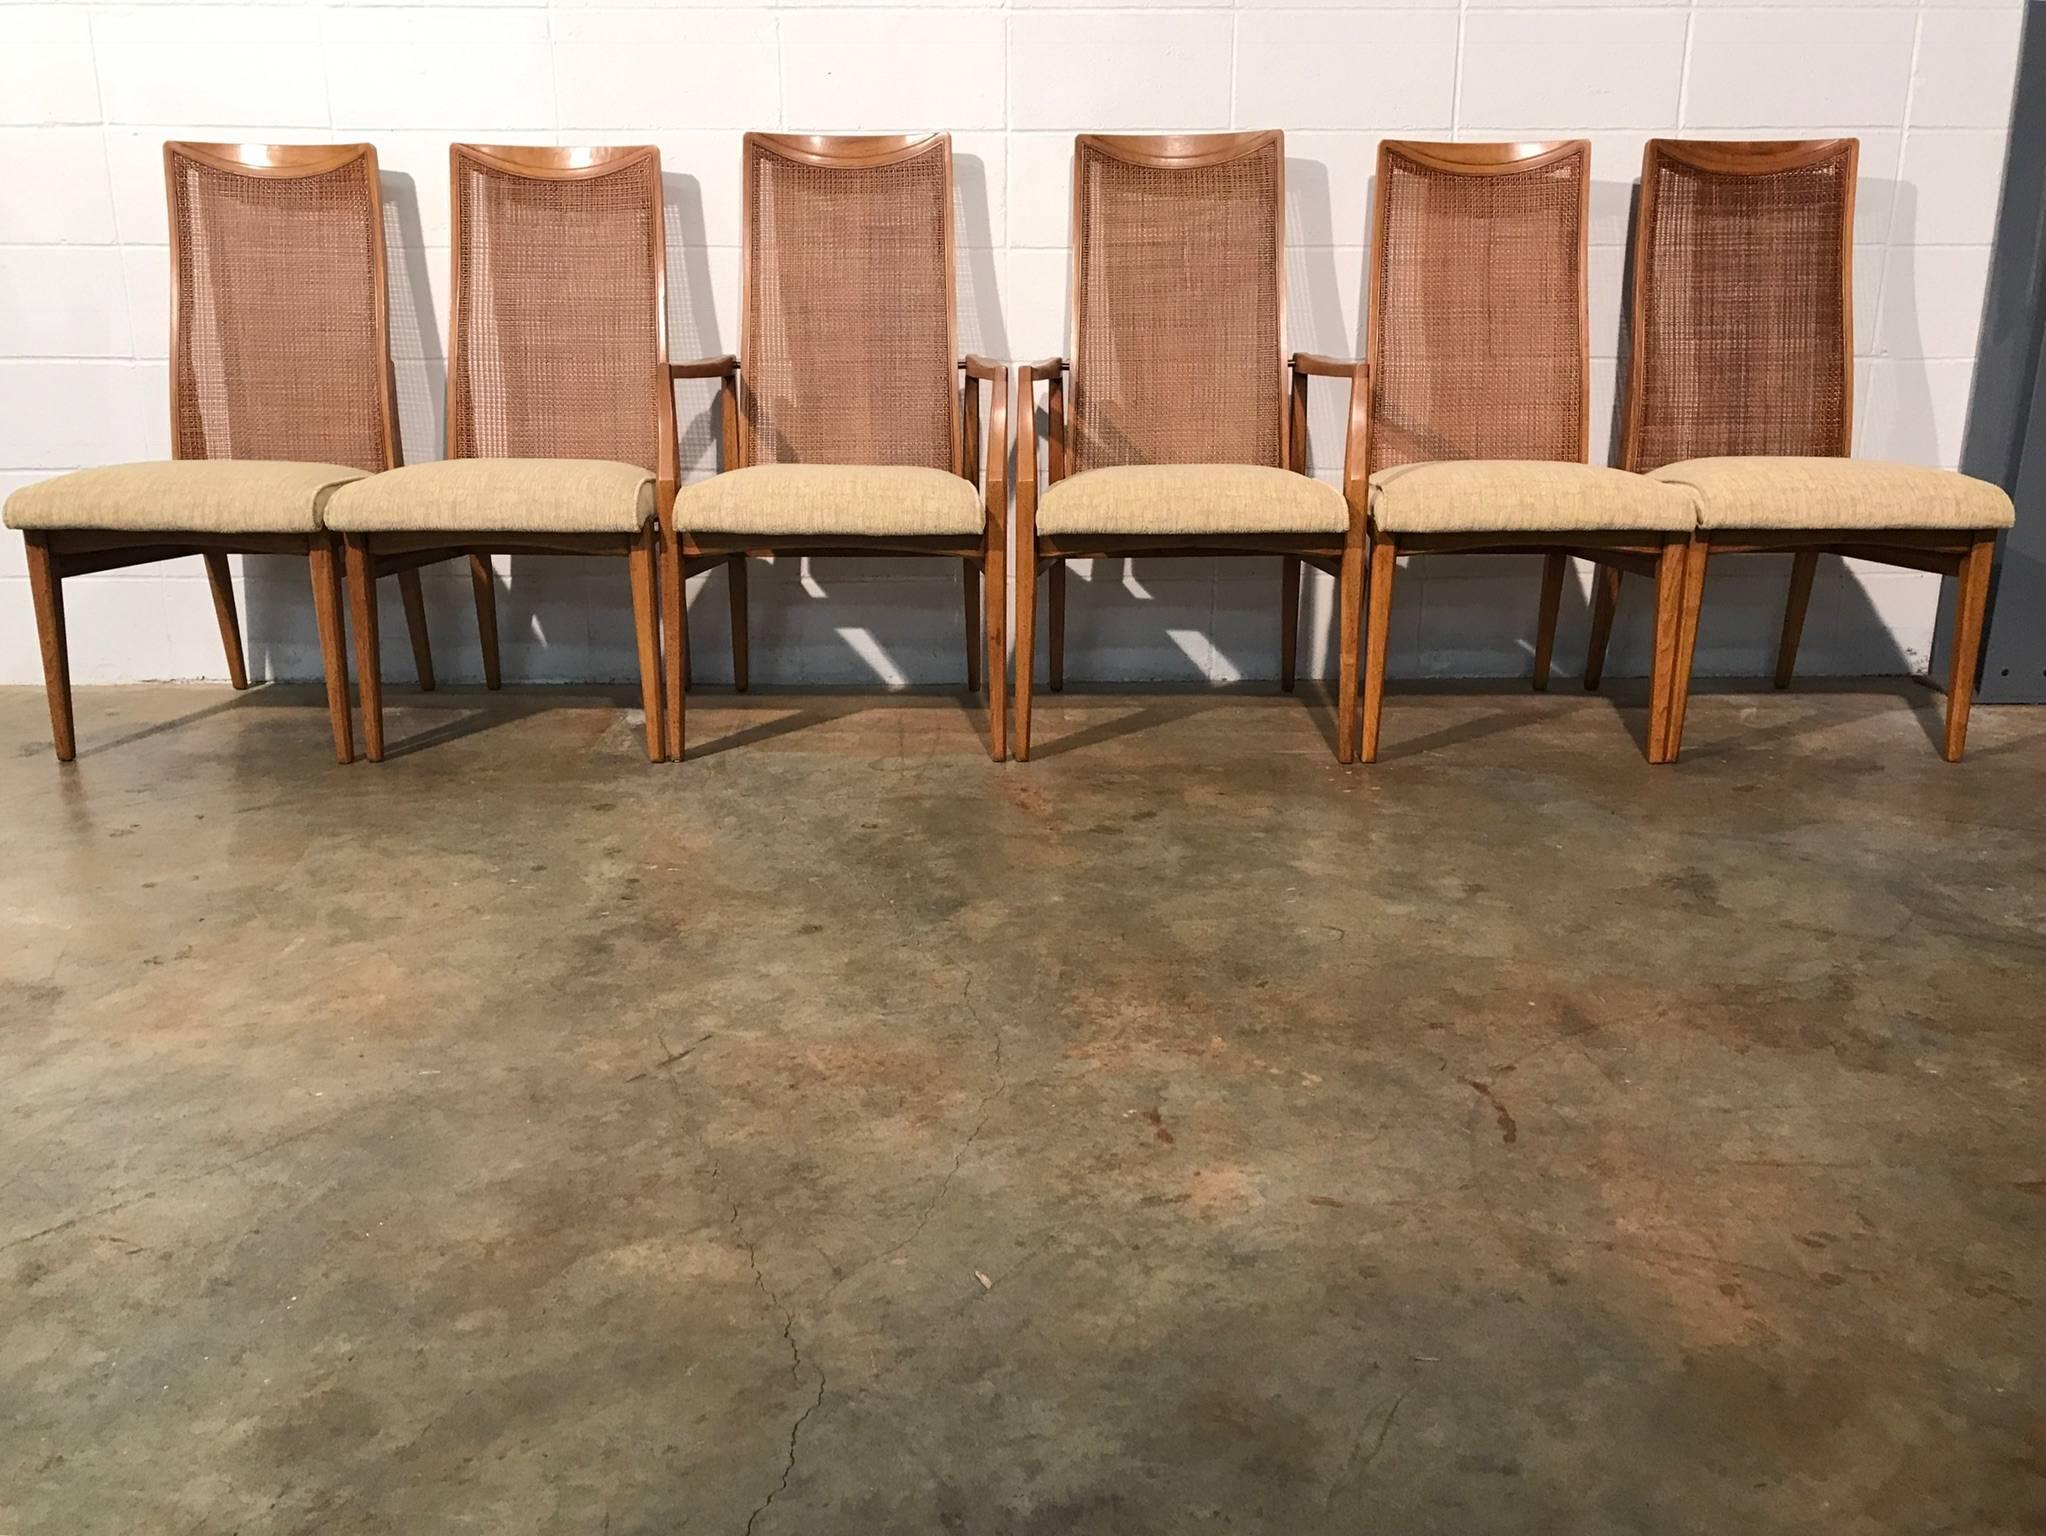 Six quality Mid-Century Modern dining chairs by Heritage Furniture.
As part of the Heritage Perrenian collection these chairs are among some of the more uncommon chairs to show up on the market. They are of high quality construction and still